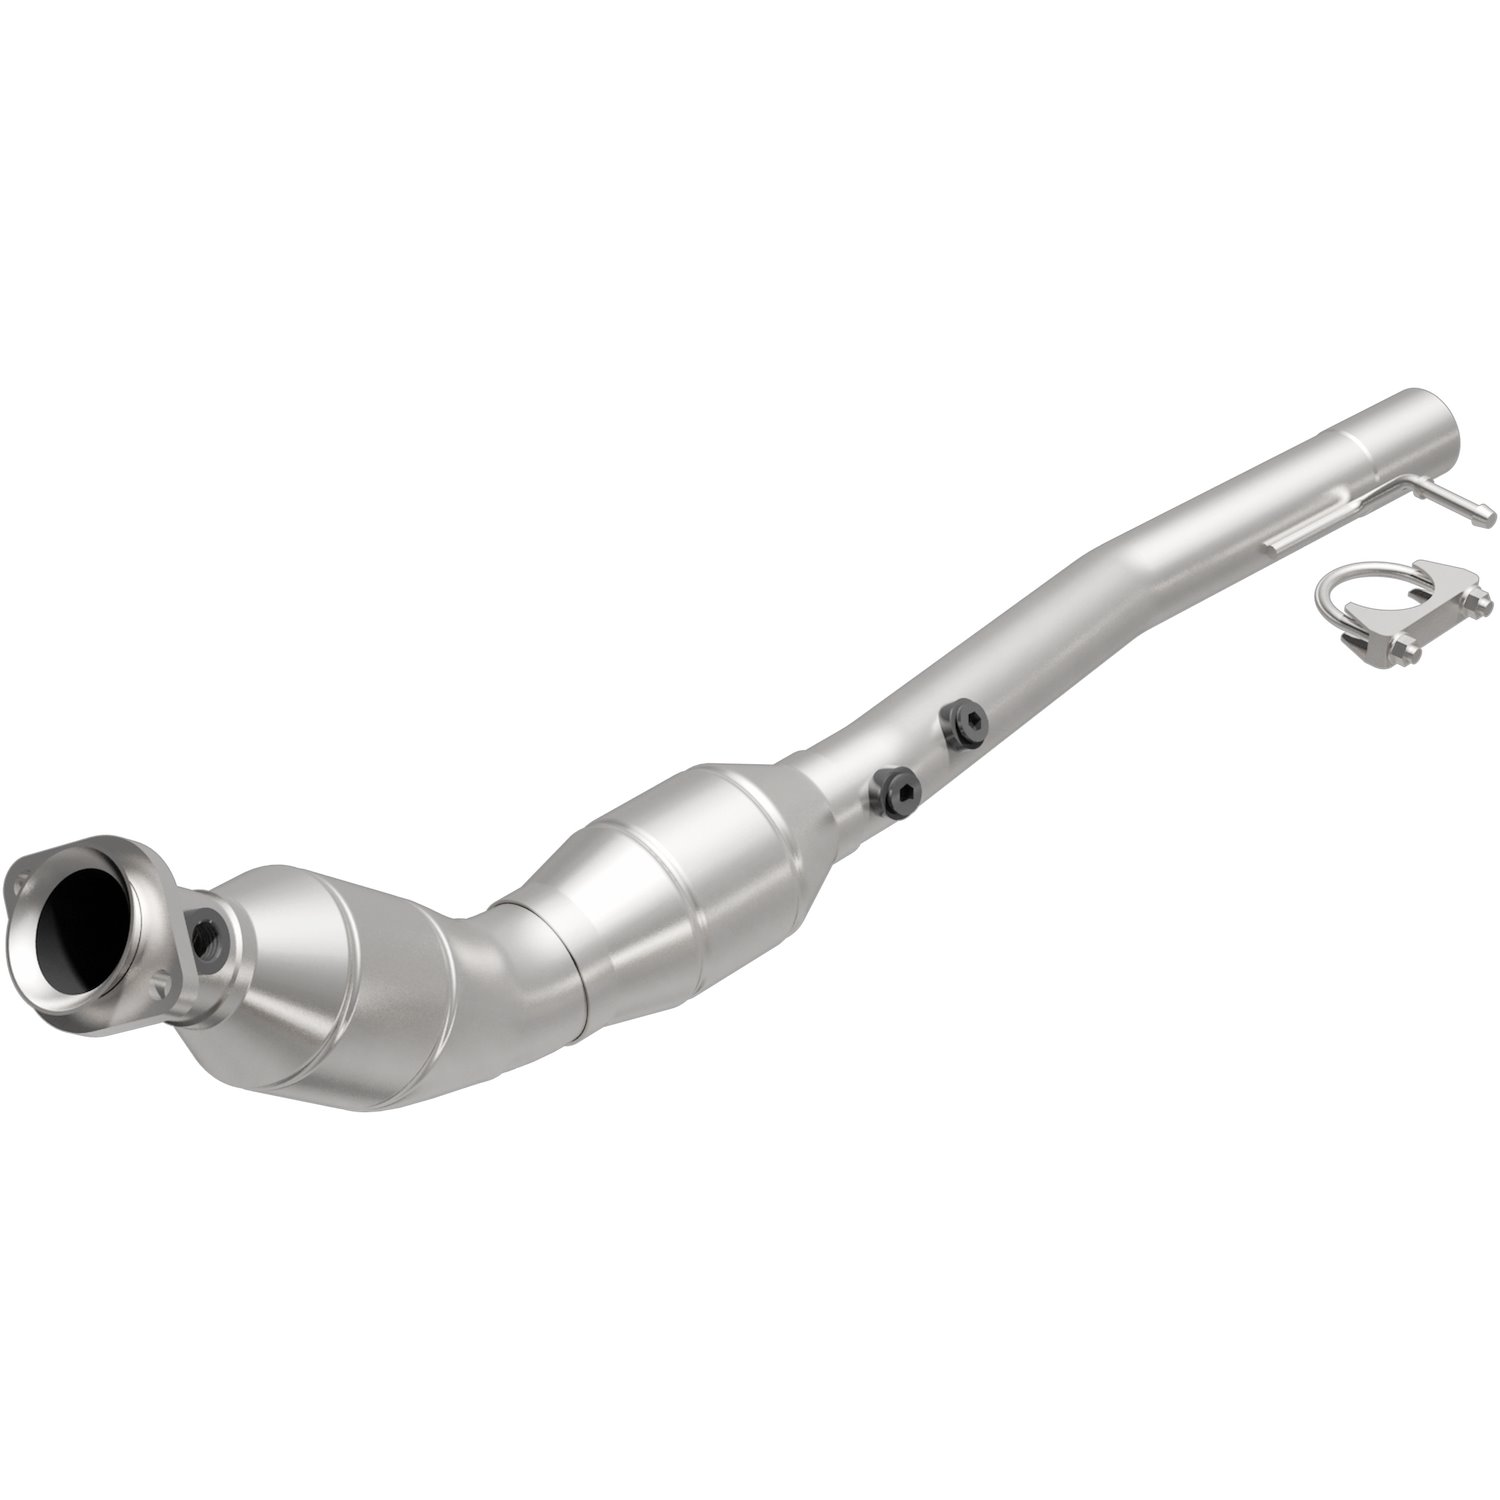 2006-2008 Land Rover Range Rover HM Grade Federal / EPA Compliant Direct-Fit Catalytic Converter